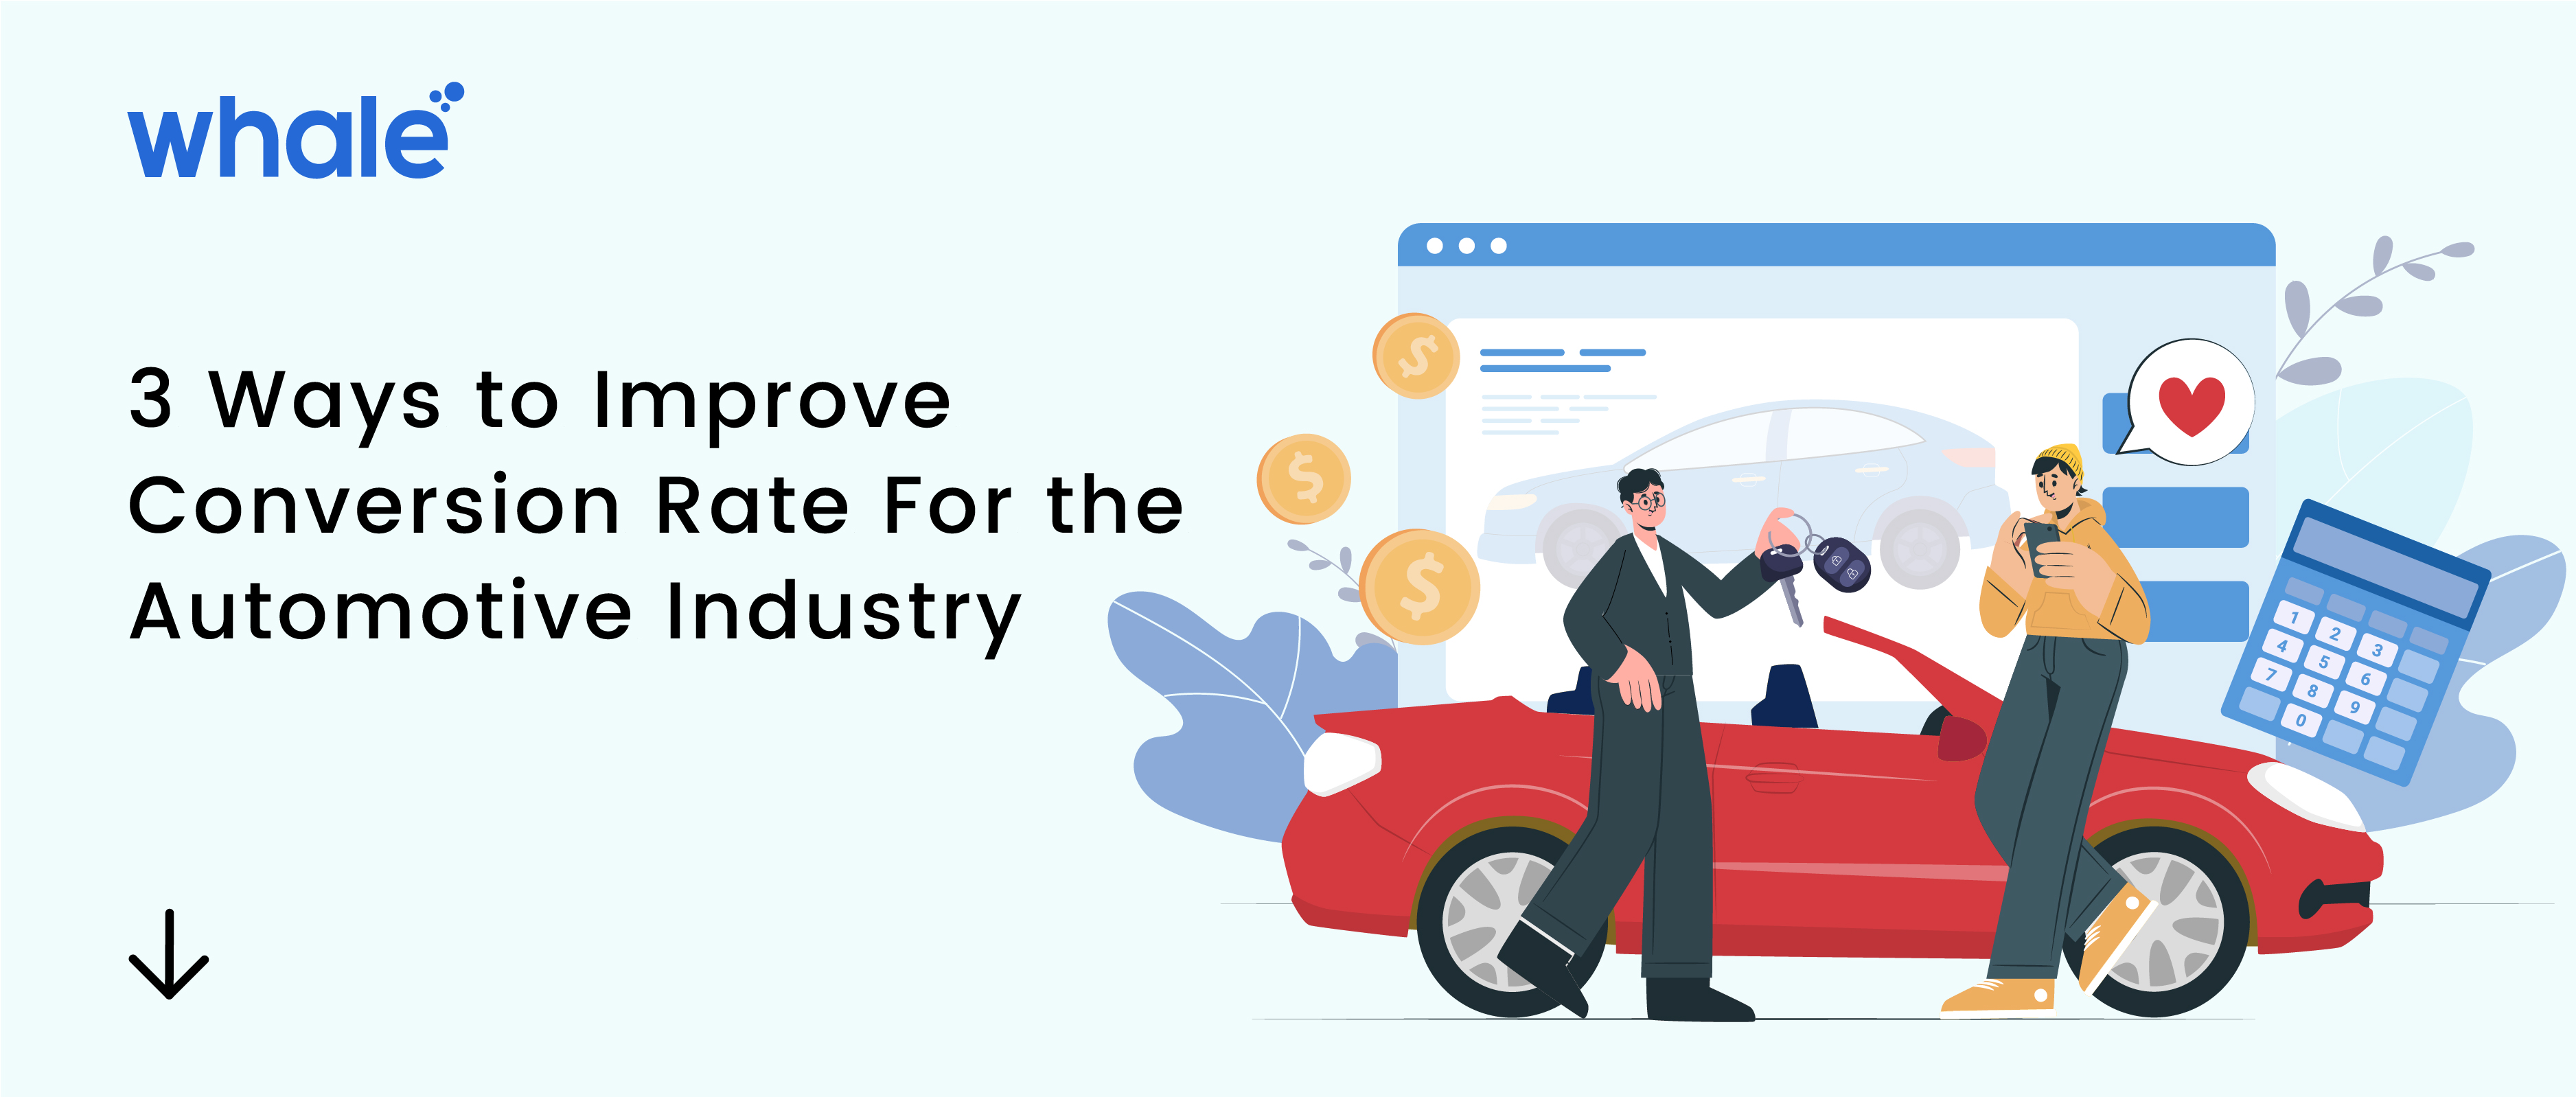 3 Ways to Improve Conversion Rate for the Automotive Industry